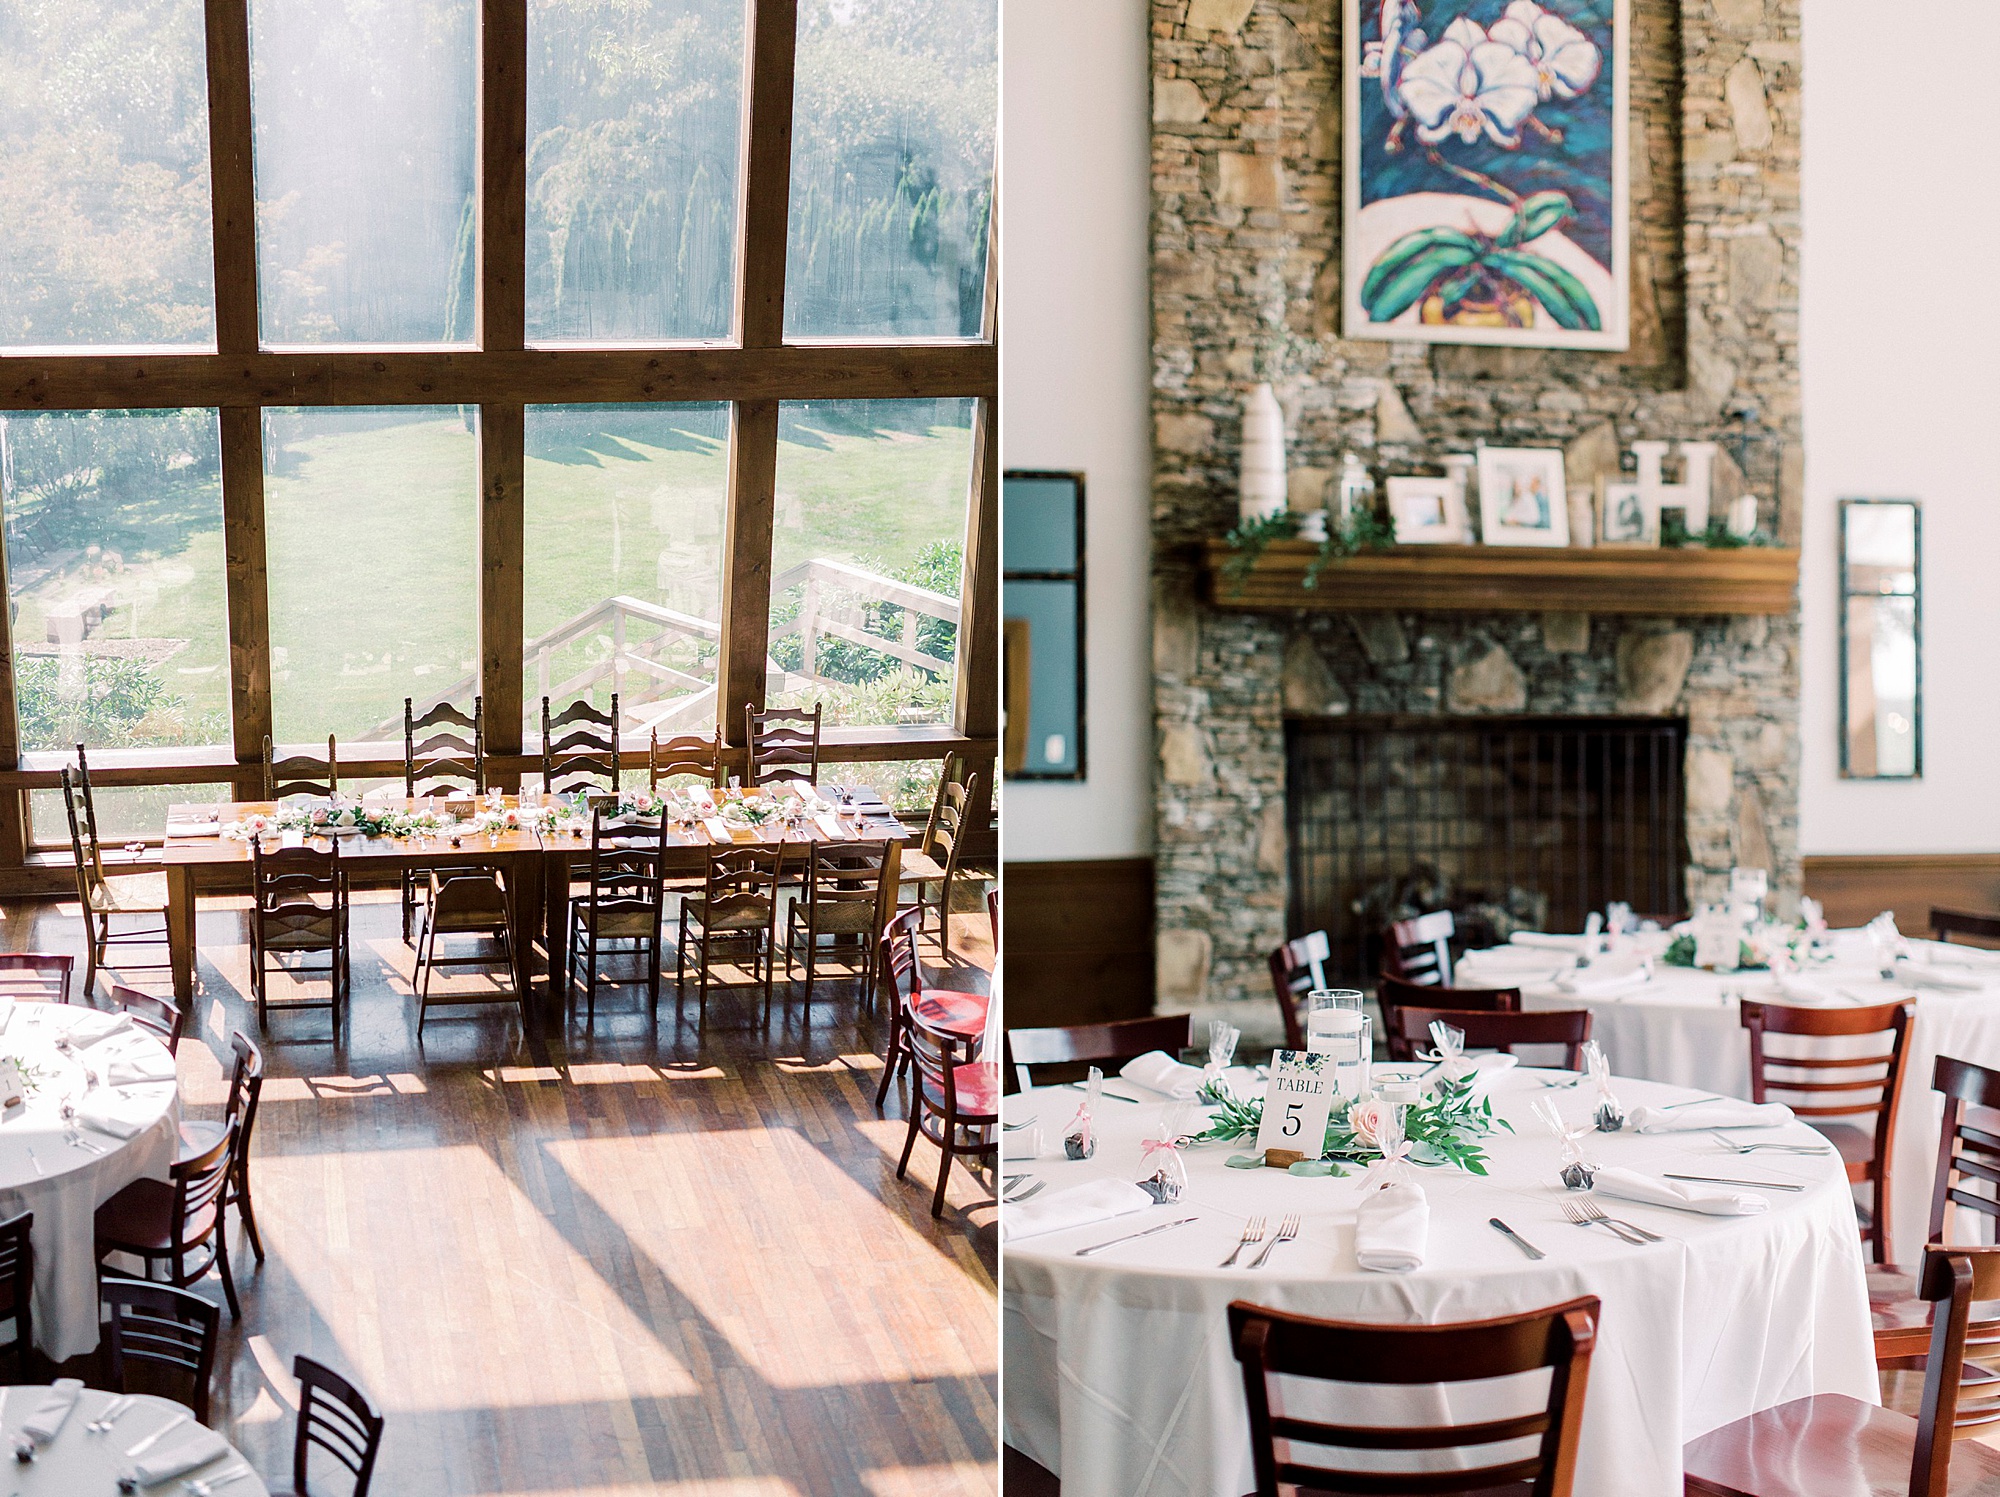 The Inn at Crestwood wedding reception details by stone fireplace